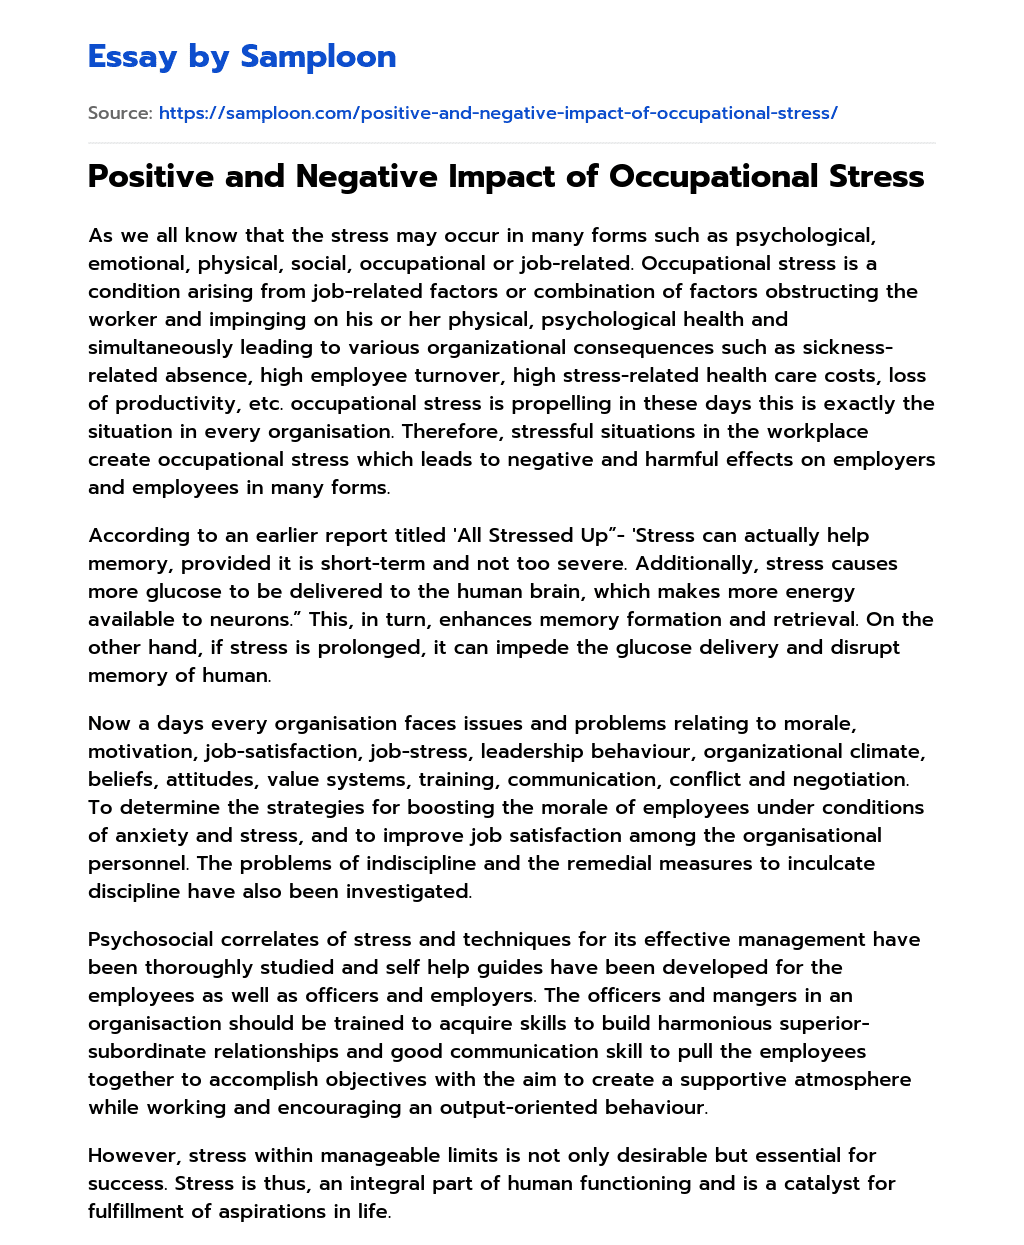 Positive and Negative Impact of Occupational Stress essay